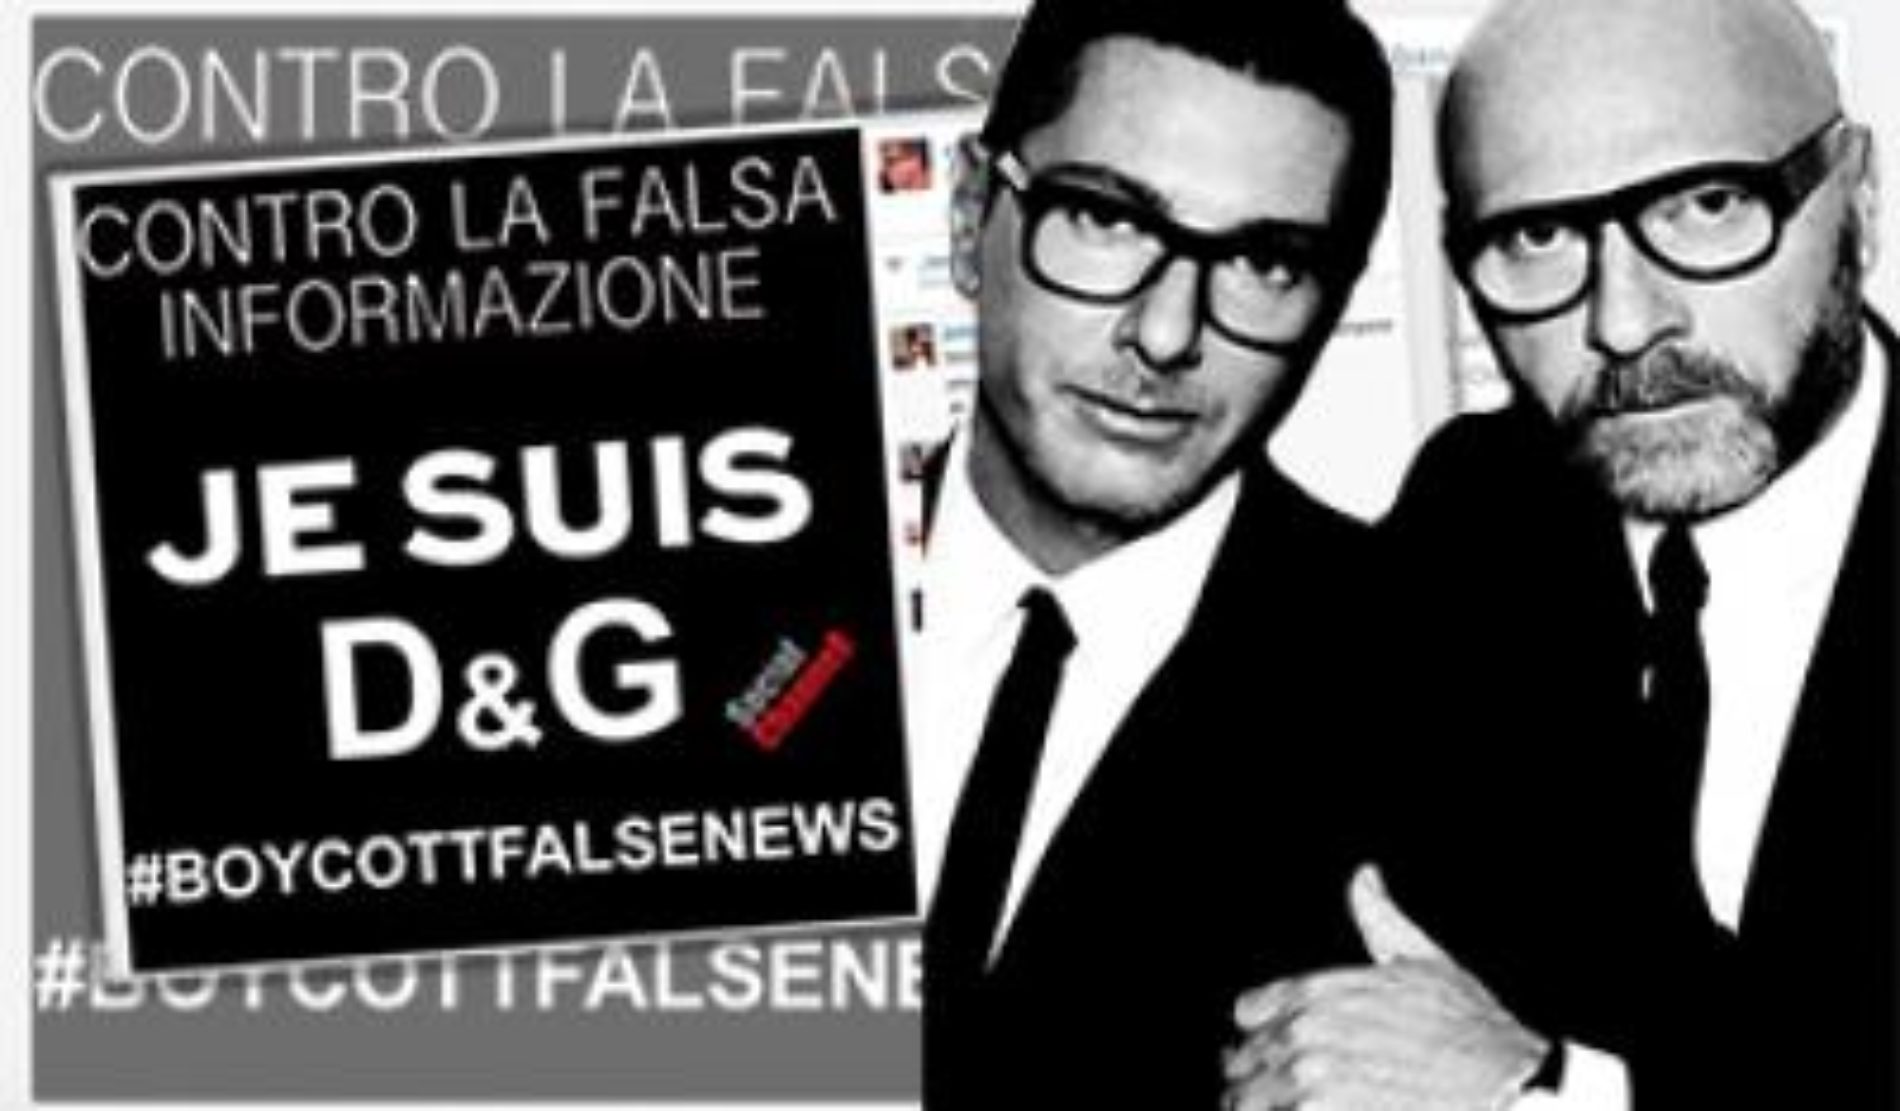 Dolce And Gabbana Respond To Backlash Over Controversial Remarks